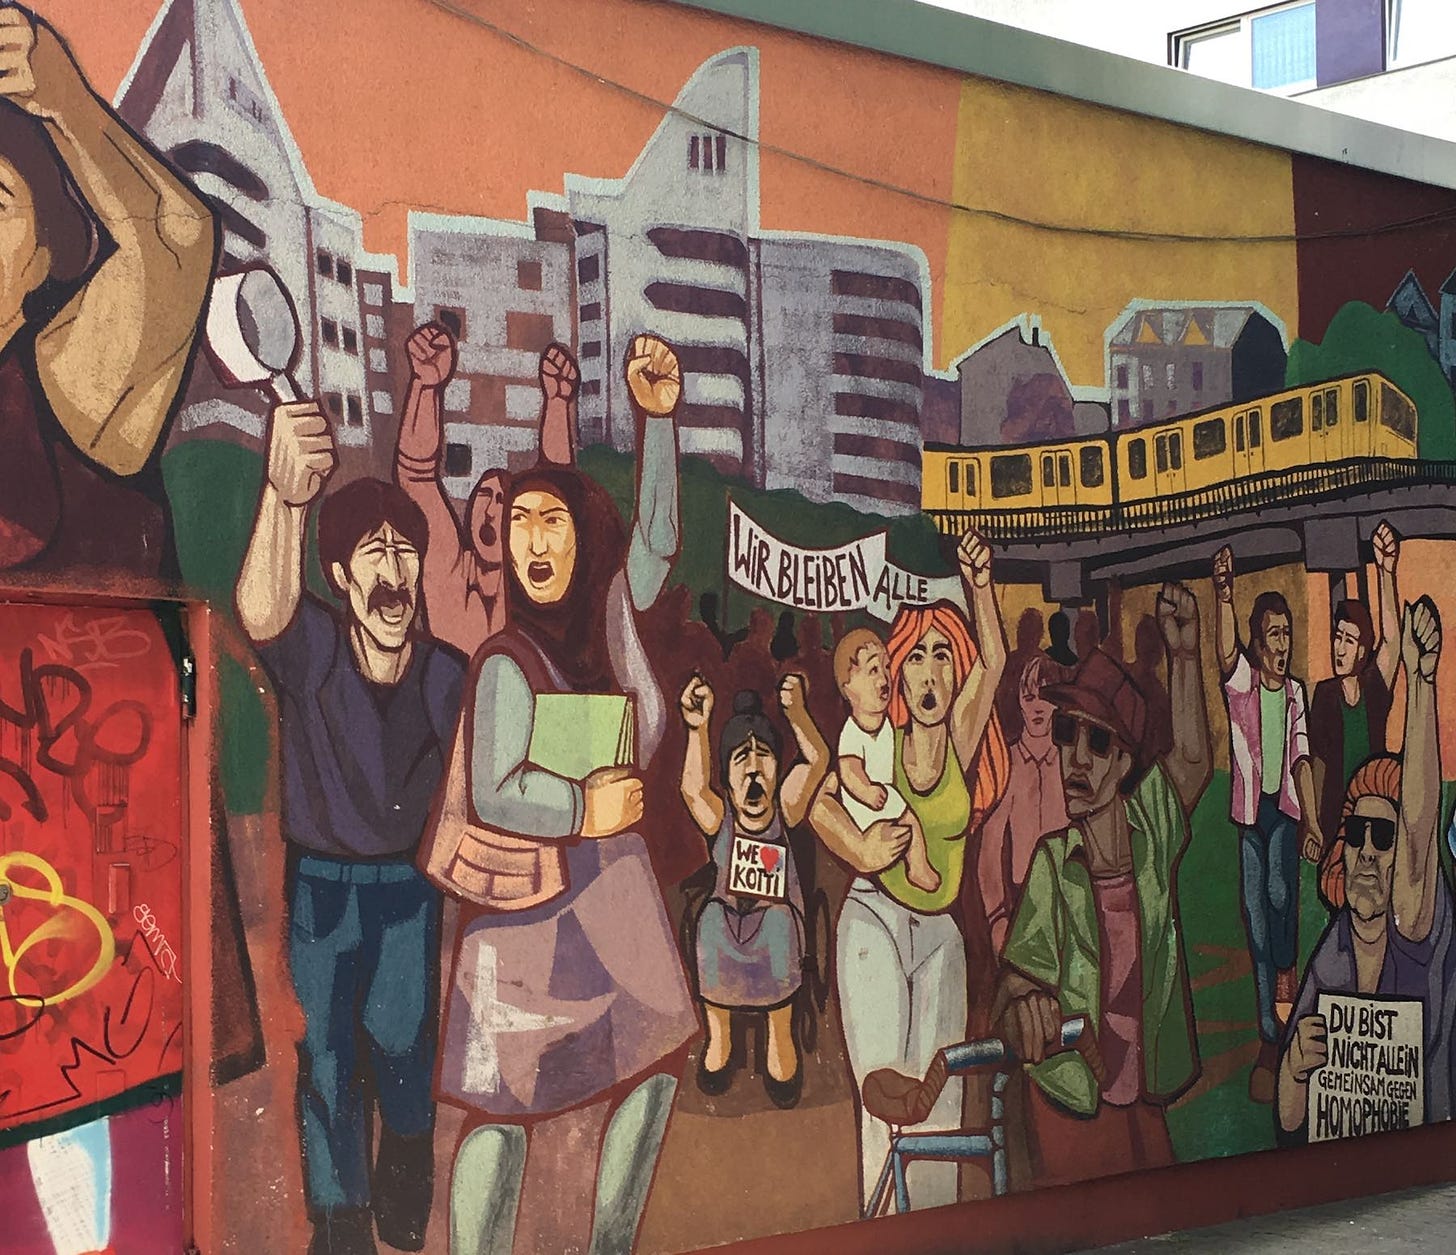 A photo of a mural painted on a wall in the Kotti neighborhood of Berlin. The mural shows buildings, a train and people protesting with sights that say Wir Bleiben Alle, which means We All Stay in English.